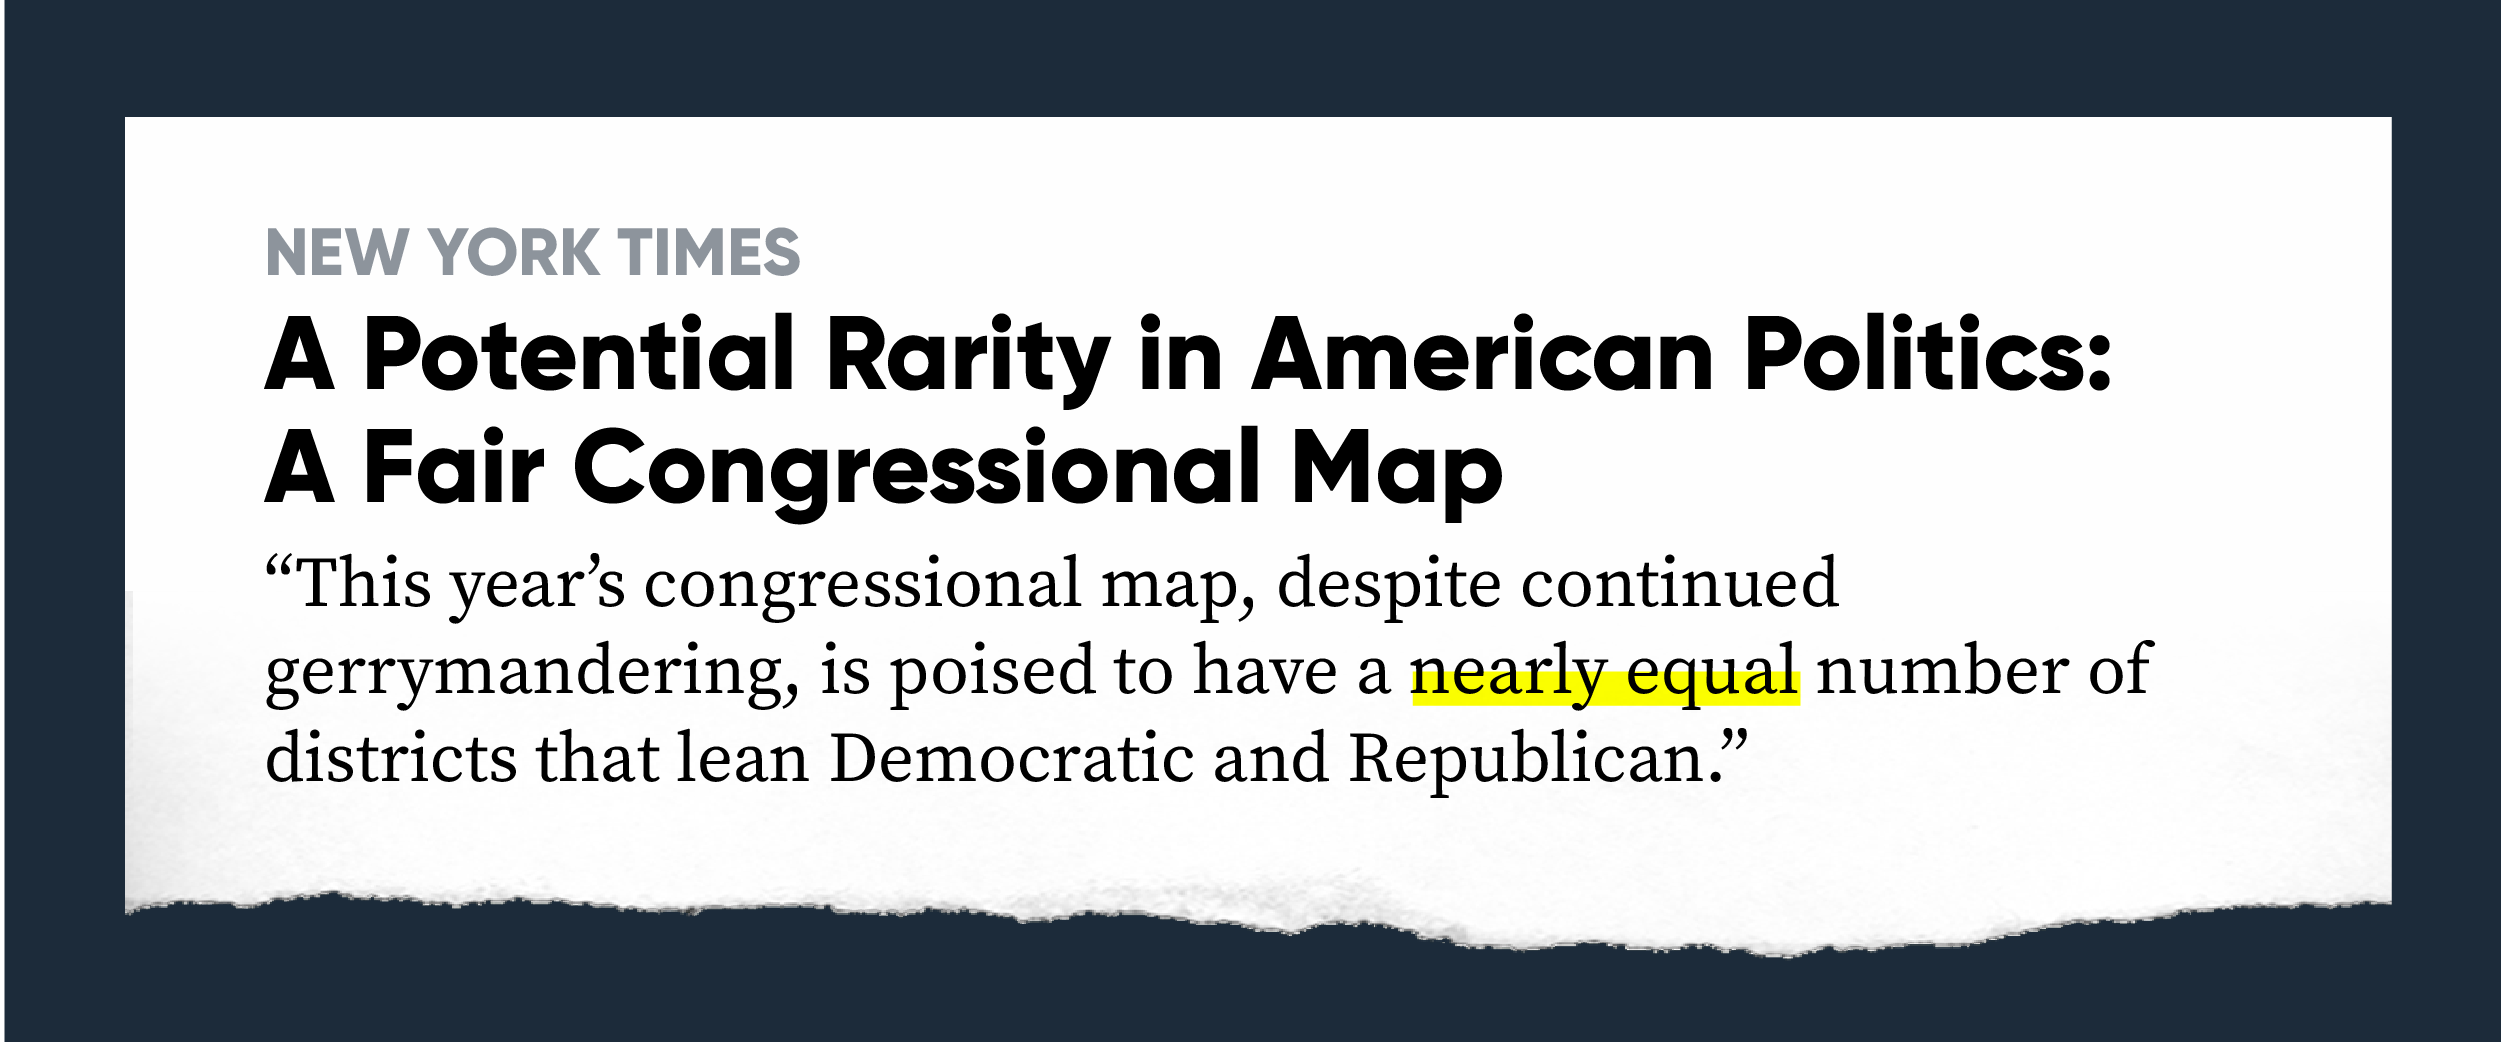 New York Times: A Potential Rarity in American Politics: A Fair Congressional Map "This year's congressional map, despite continued gerrymandering, is poised to have a nearly equal number of districts that lean Democratic and Republican."